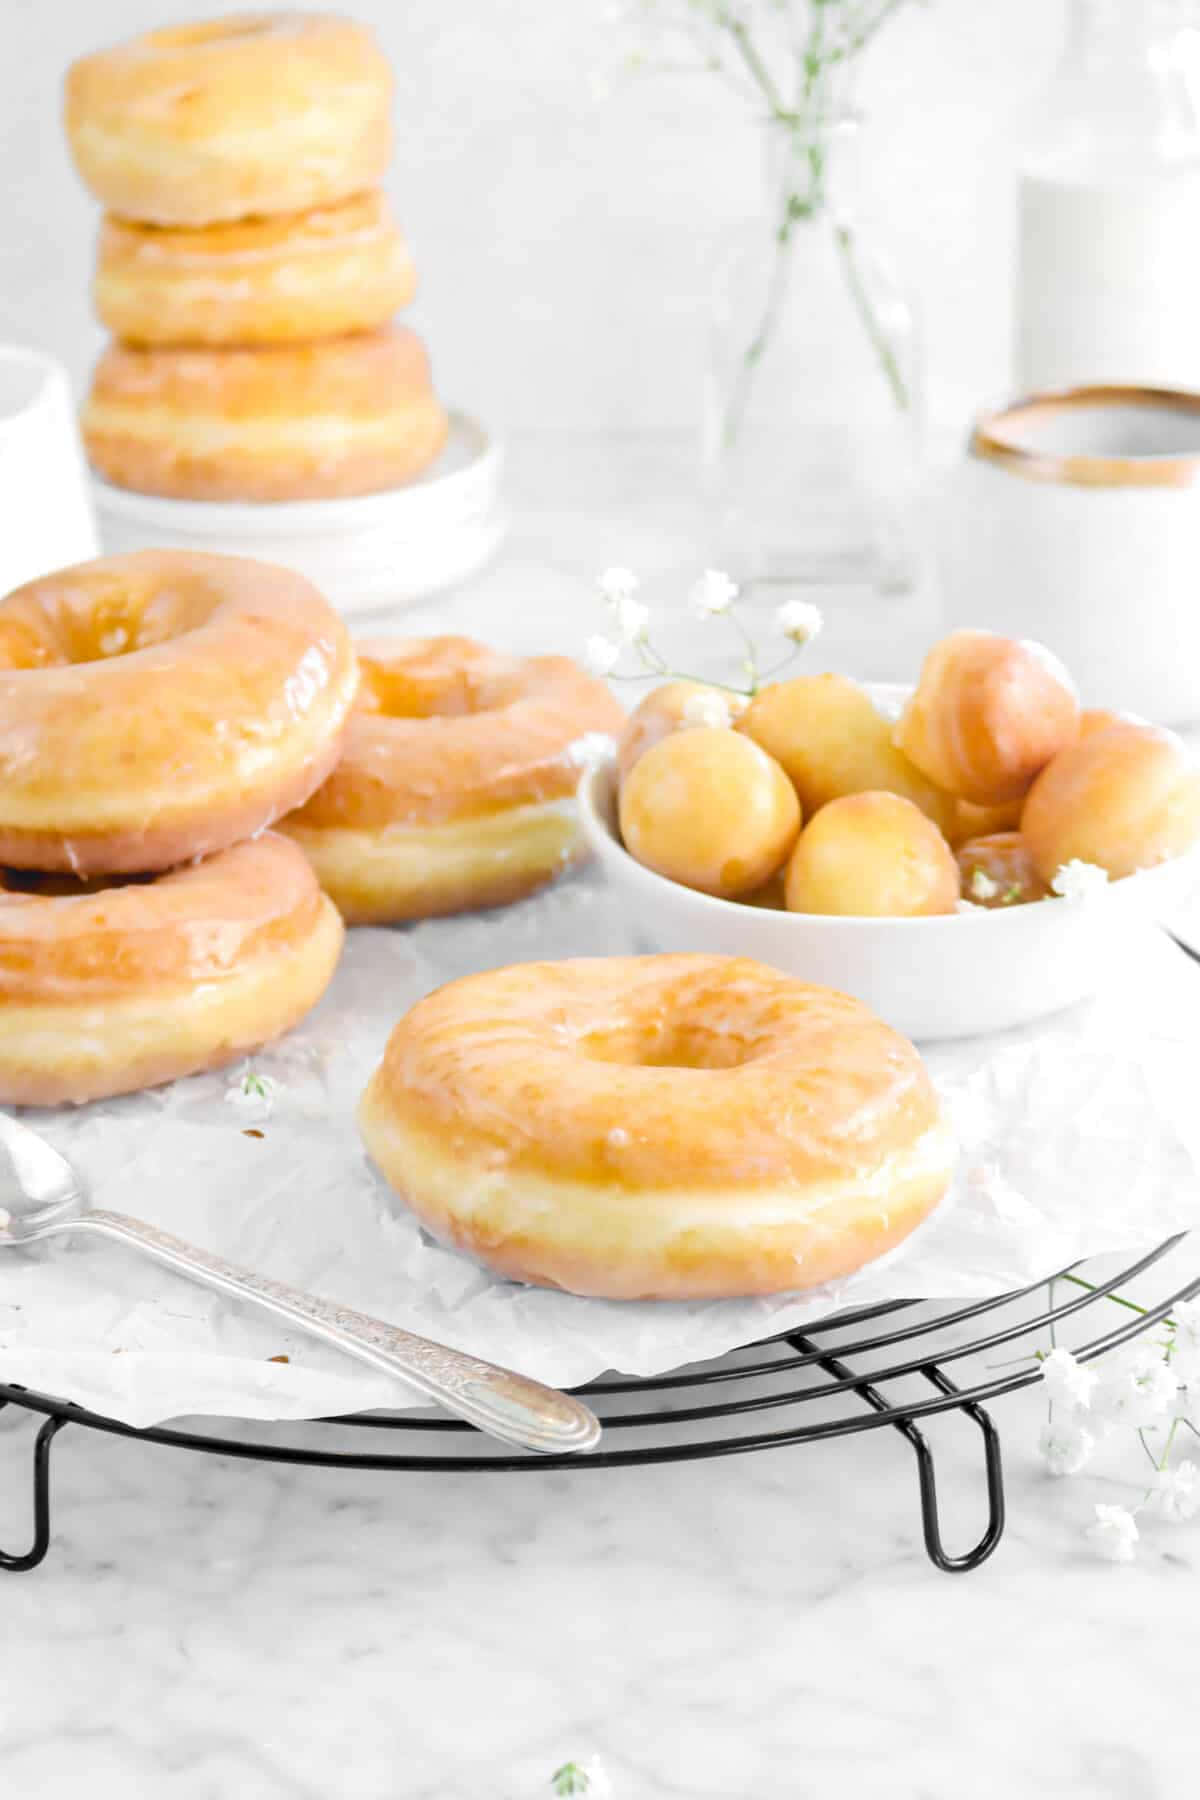 "Enjoy a sweet, delicious, and classic Glazed Donut". Wallpaper